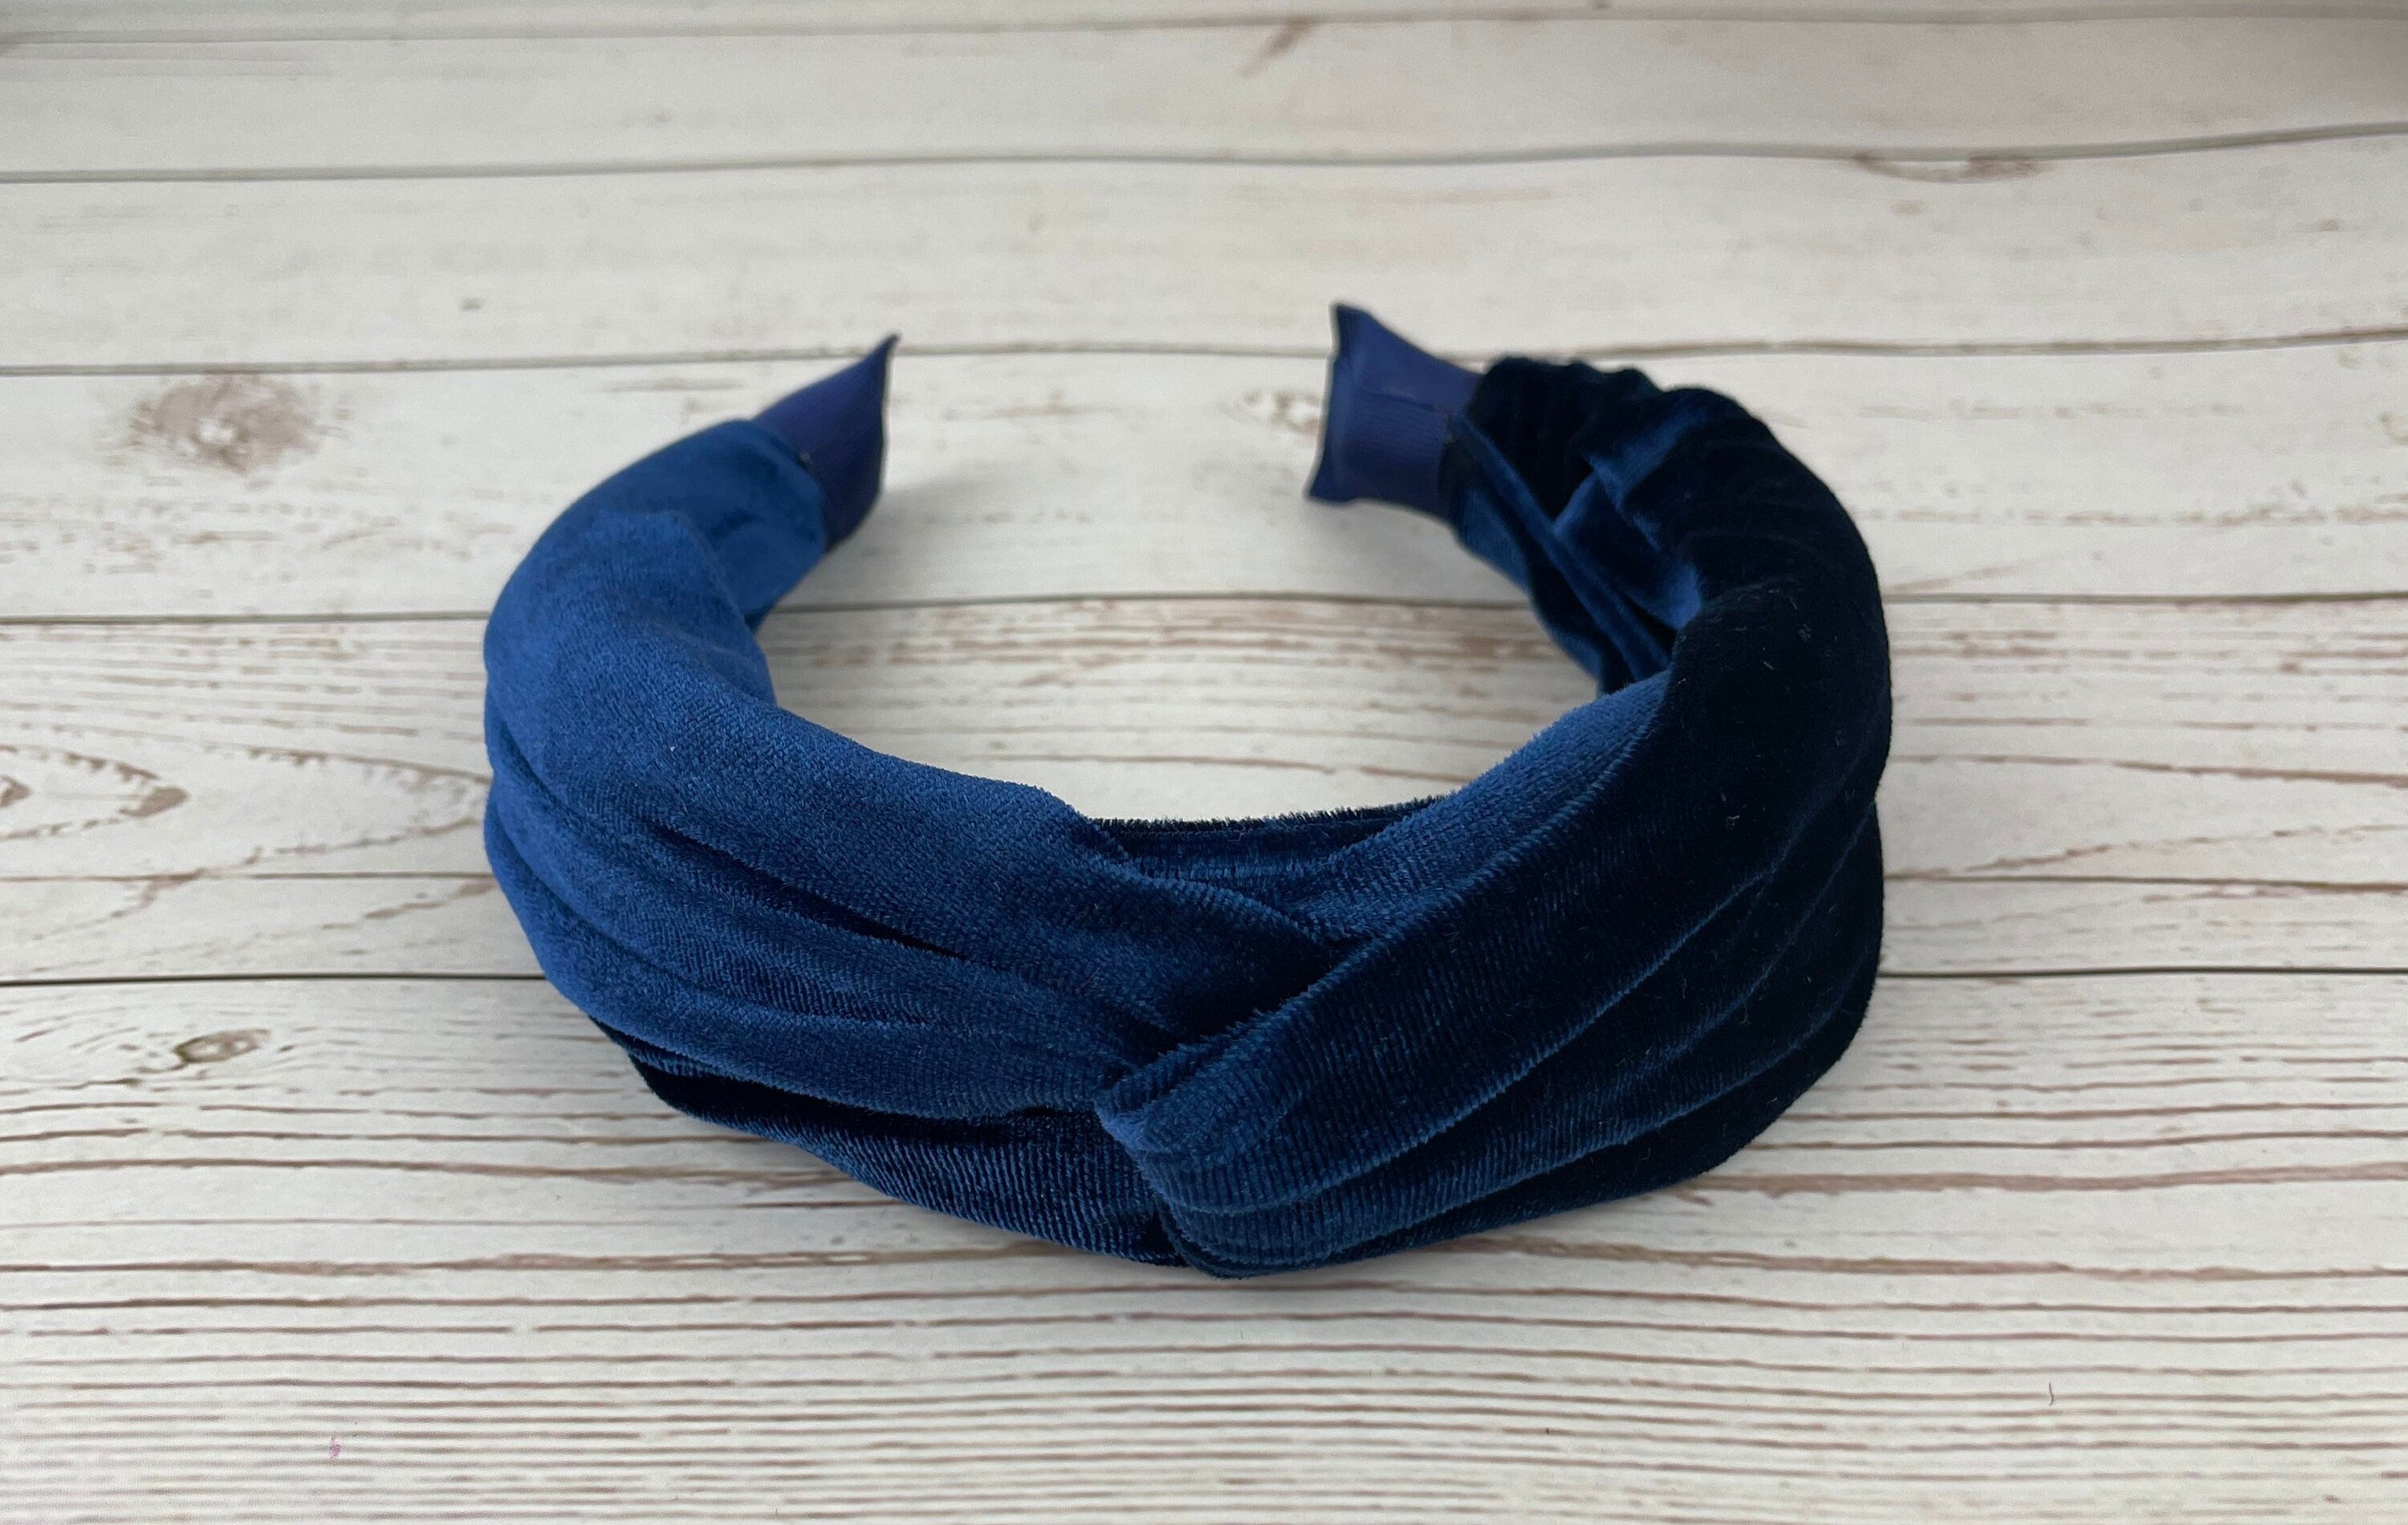 Experience luxury without sacrificing comfort with this fashionable headband. Unlike padded headbands, this knotted velvet hairband provides a sleek and comfortable fit for all-day wear.